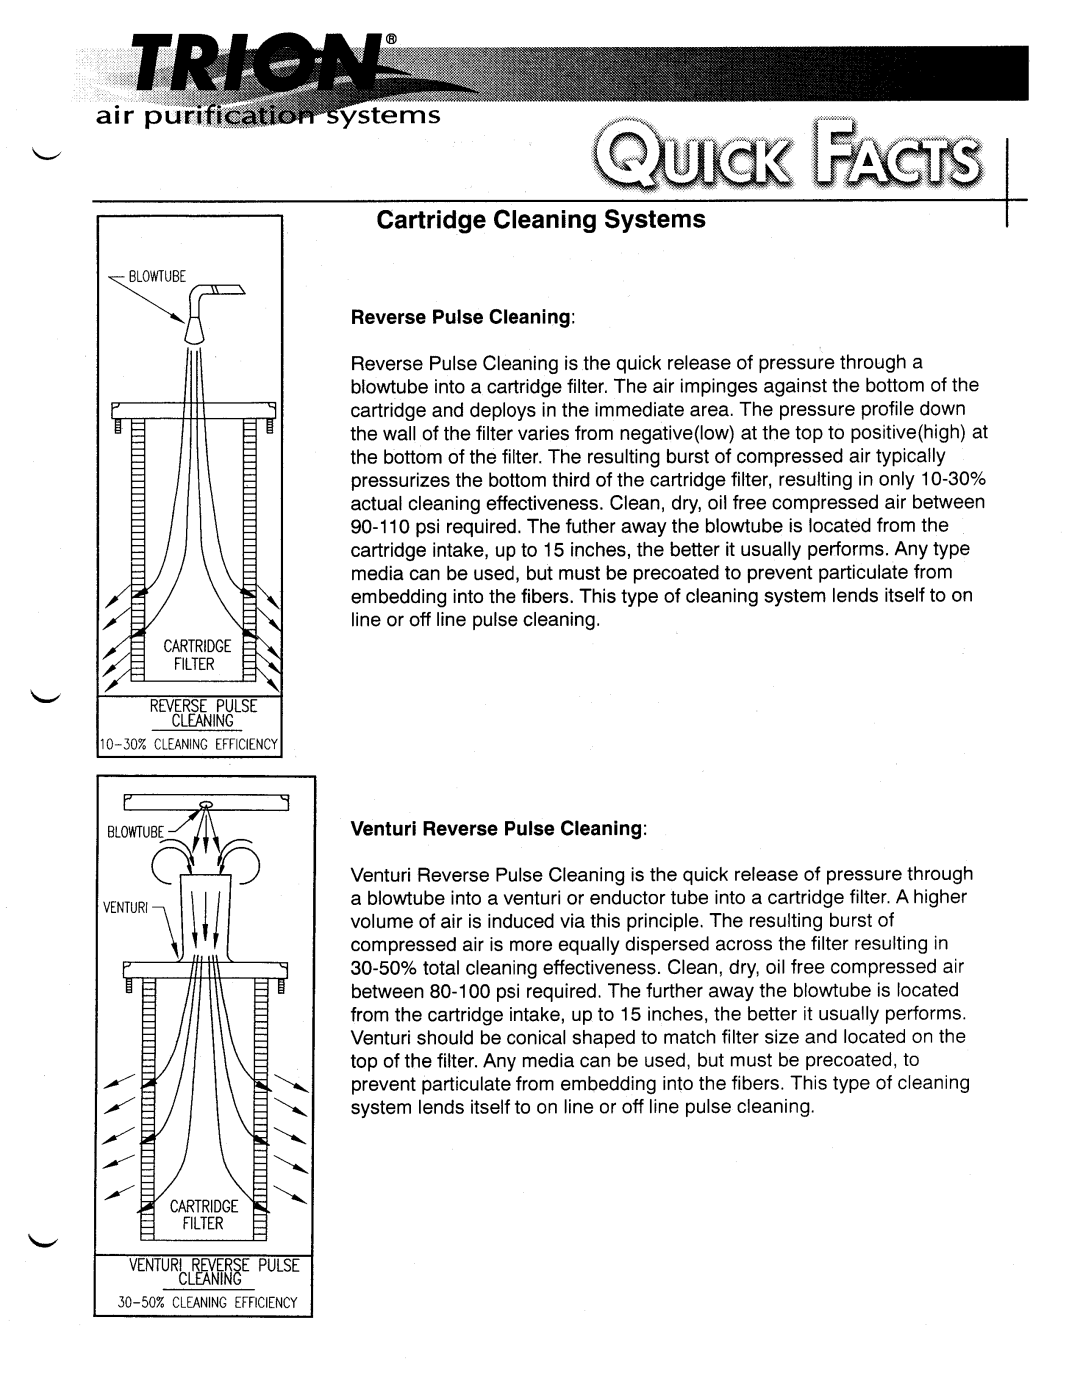 Trion Cartridge Cleaning Systems manual 